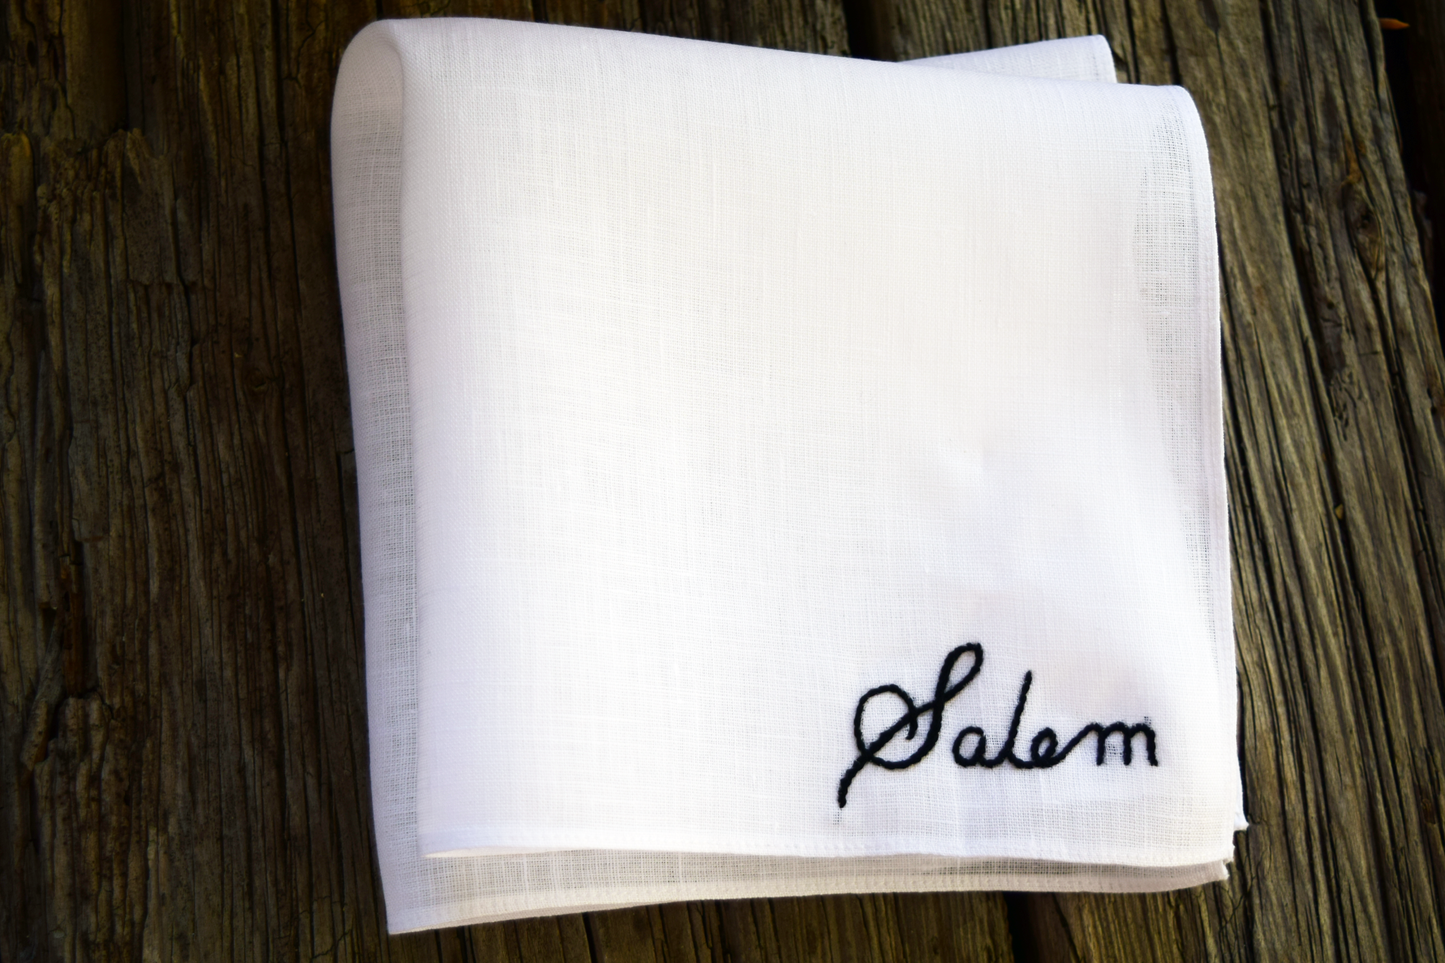 Hand embroidered pocket square with name 'Salem' hand embroidered in cursive